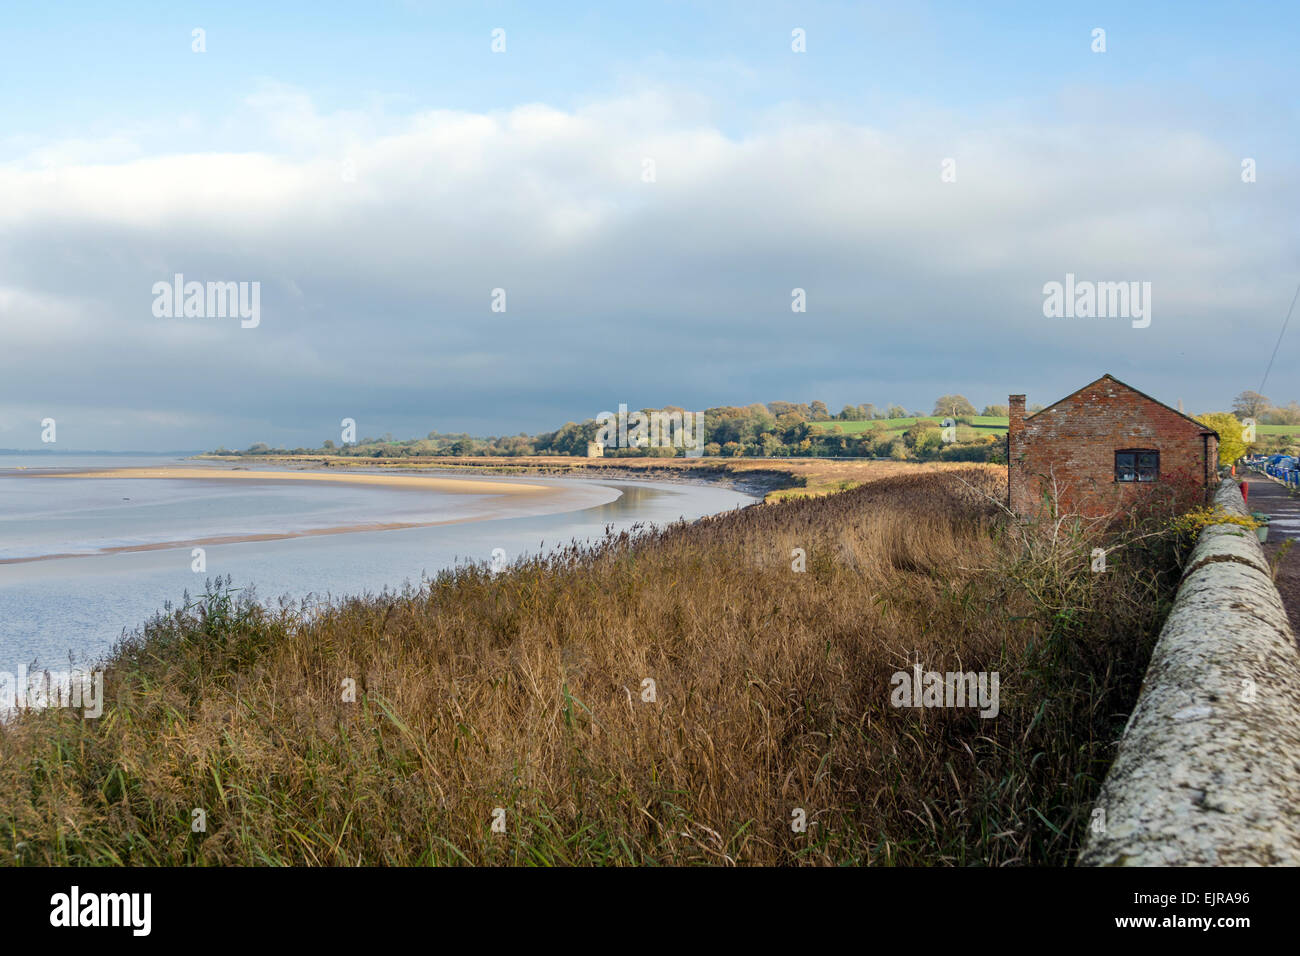 The River Severn next to the Sharpness Canal which takes shipping inland to Gloucester. Stock Photo